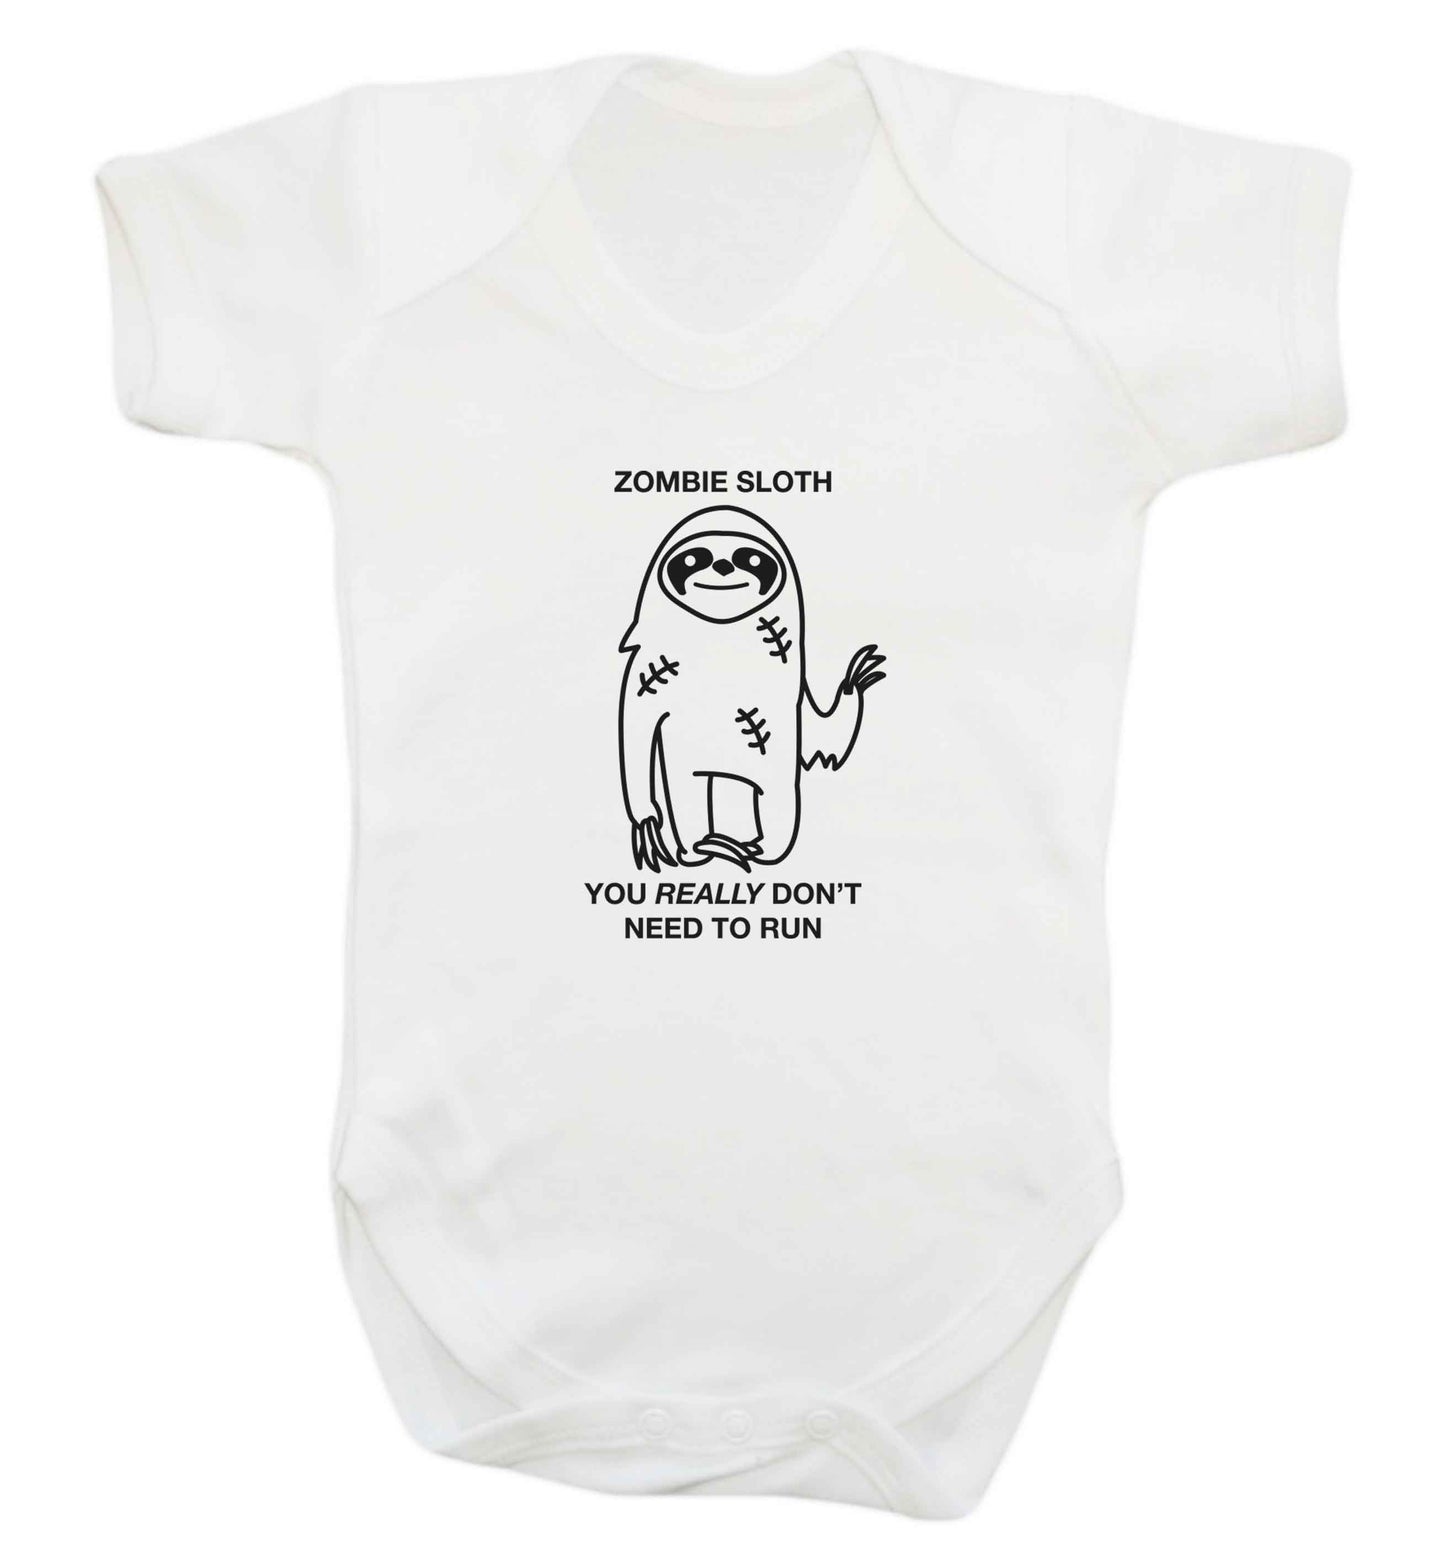 Zombie sloth you really don't need to run baby vest white 18-24 months